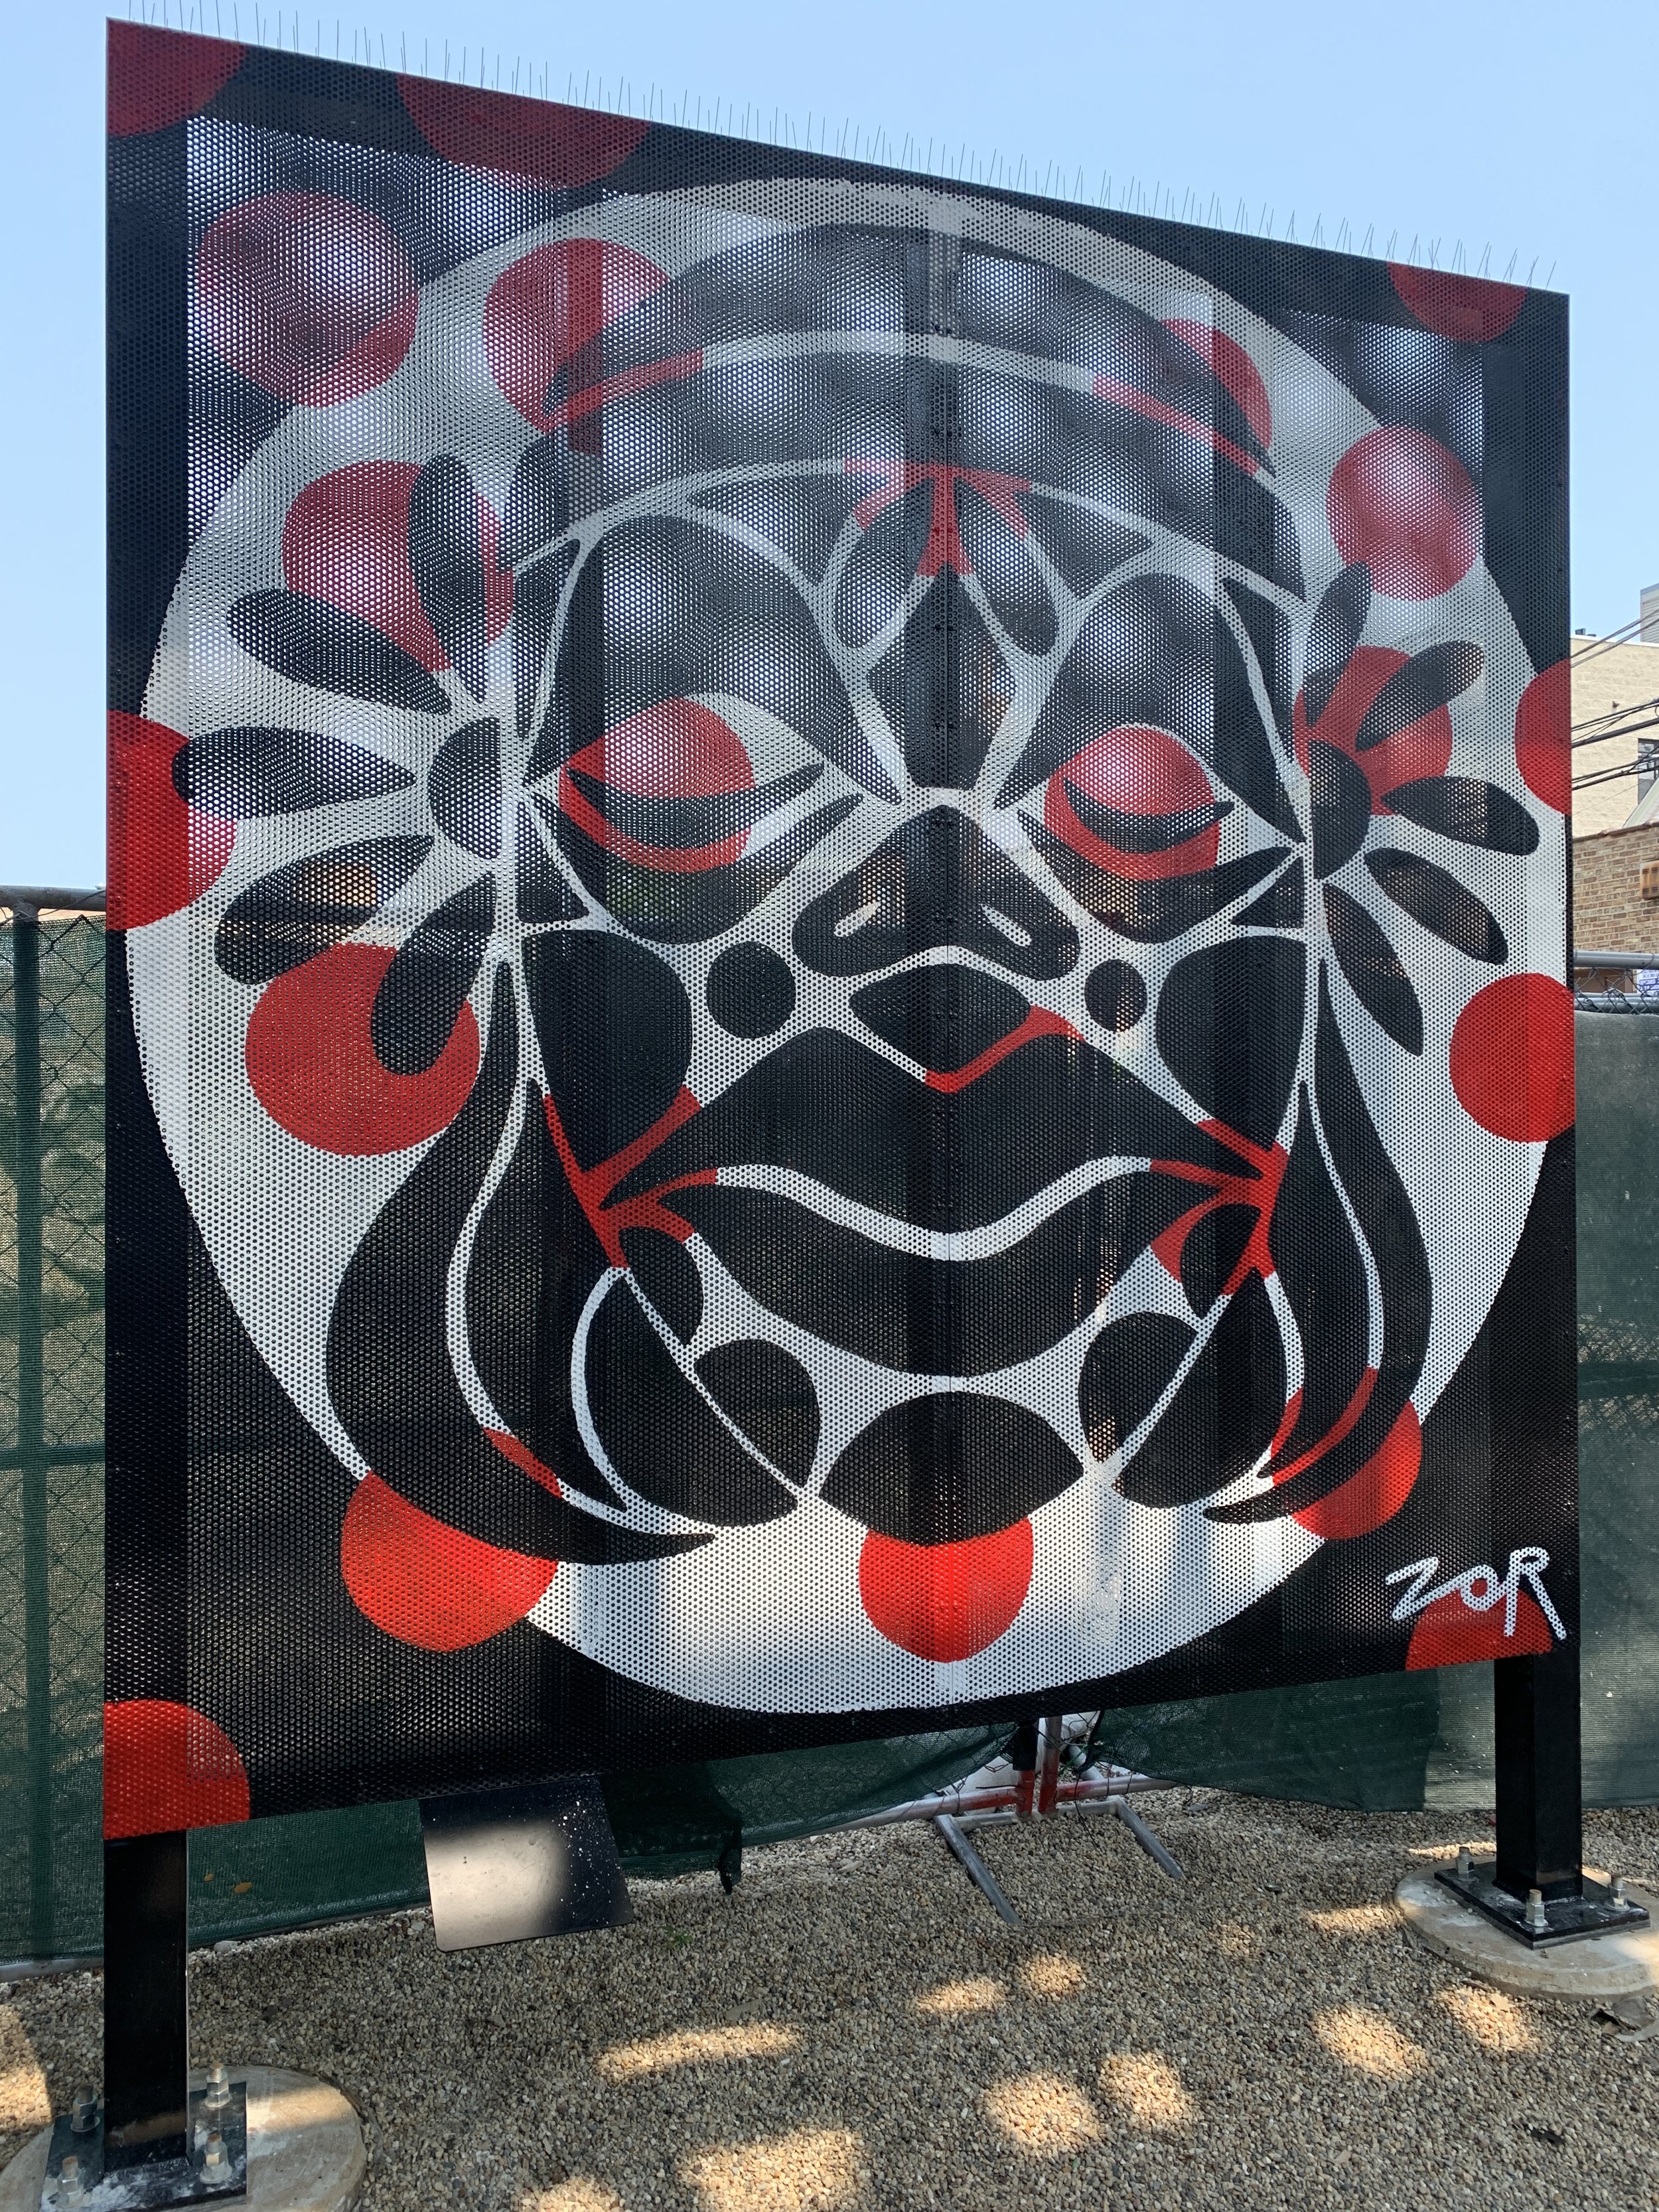 The Face, Zor Zor Zor (2021-2022): 3410 N. Ashland Ave.  “当我开始发展自己的风格时, 我喜欢把不同的形状和设计拼在一起，创造出这些像面具一样的角色. Many of my paintings are just in black and white; the s